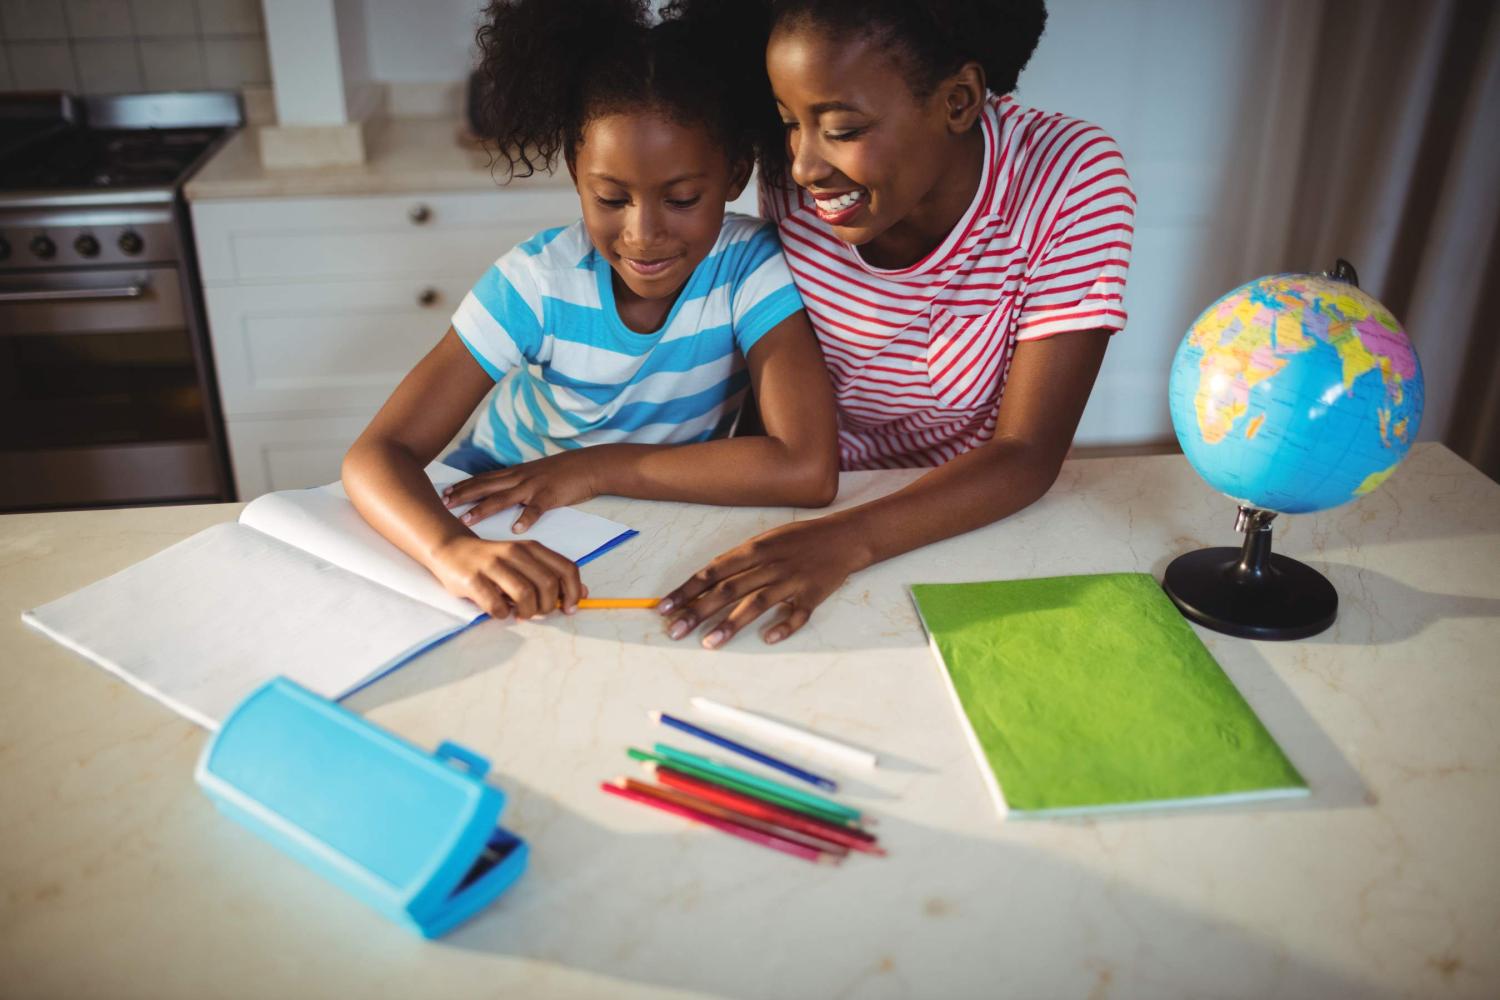 A mother helps her child with homework (Photo credit: WBMUL / Shutterstock)